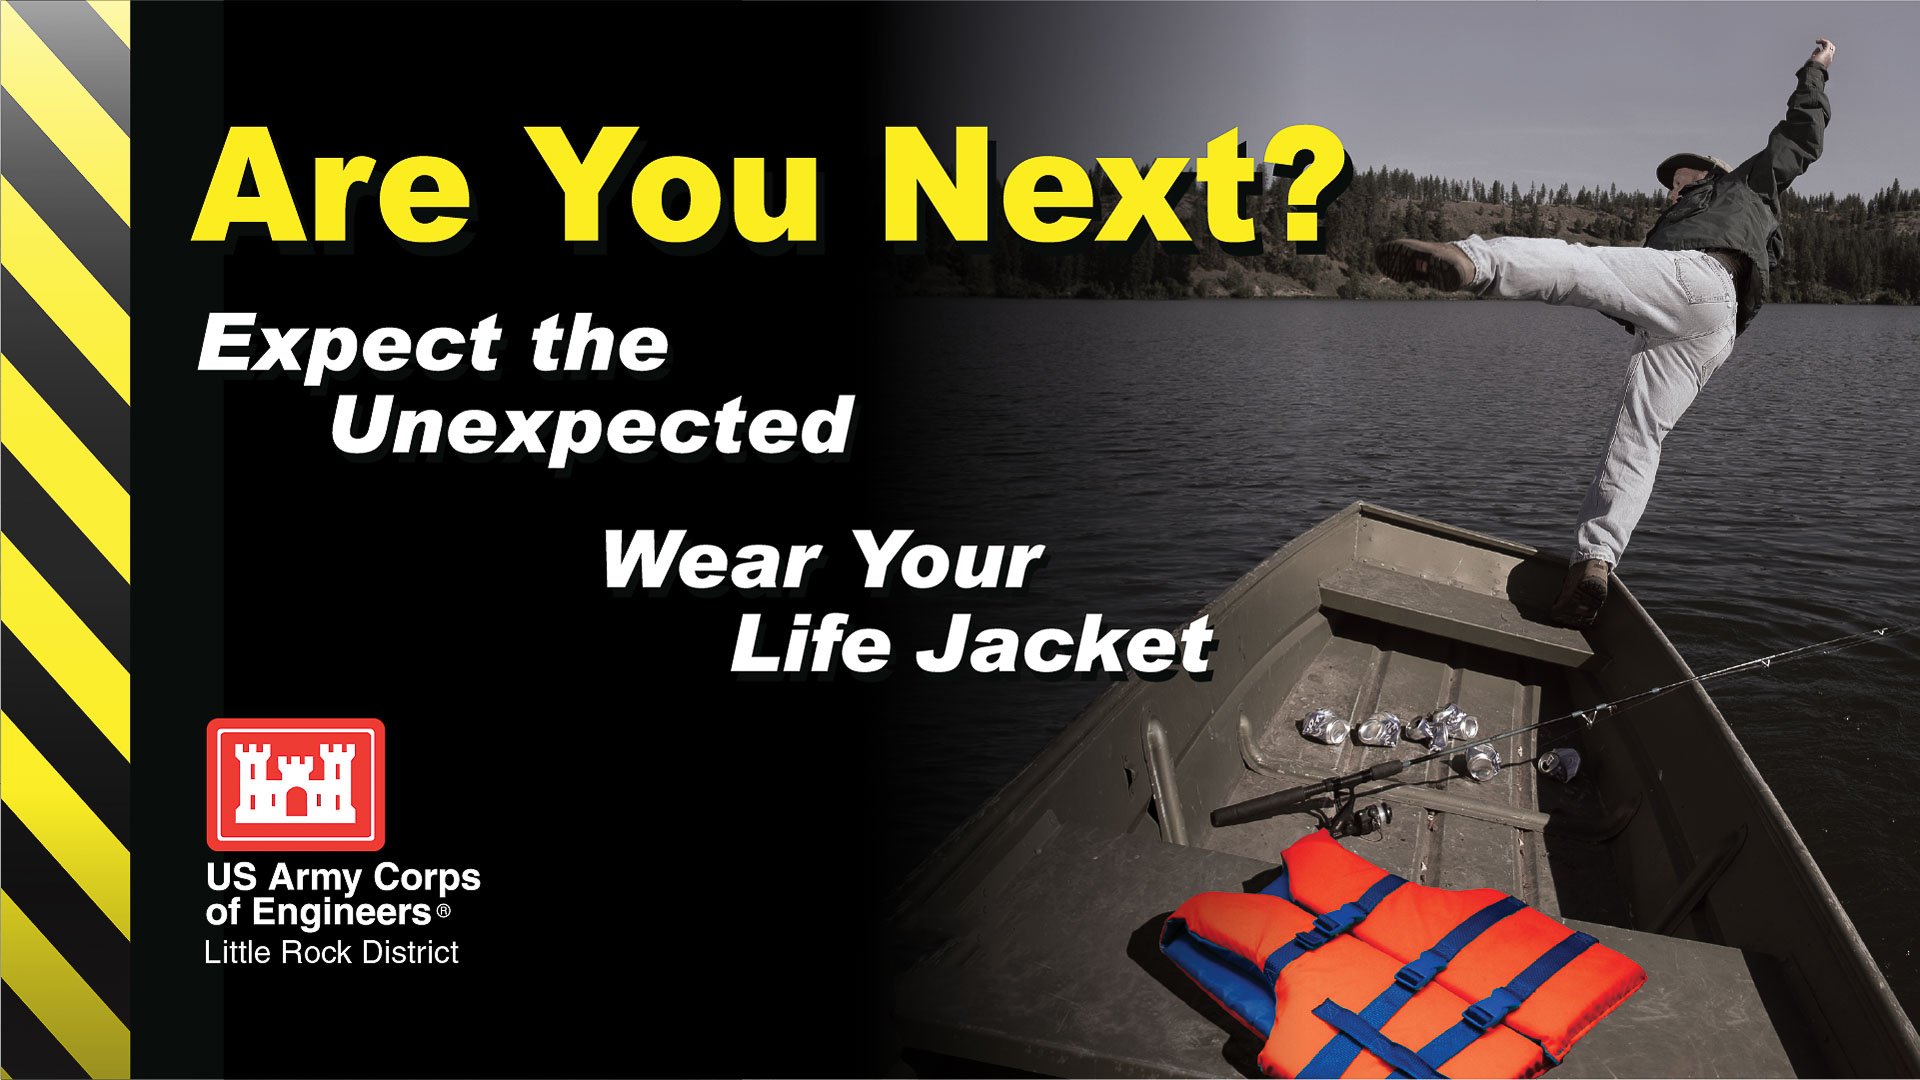 Water Safety Are You Next - Table Rock Lake